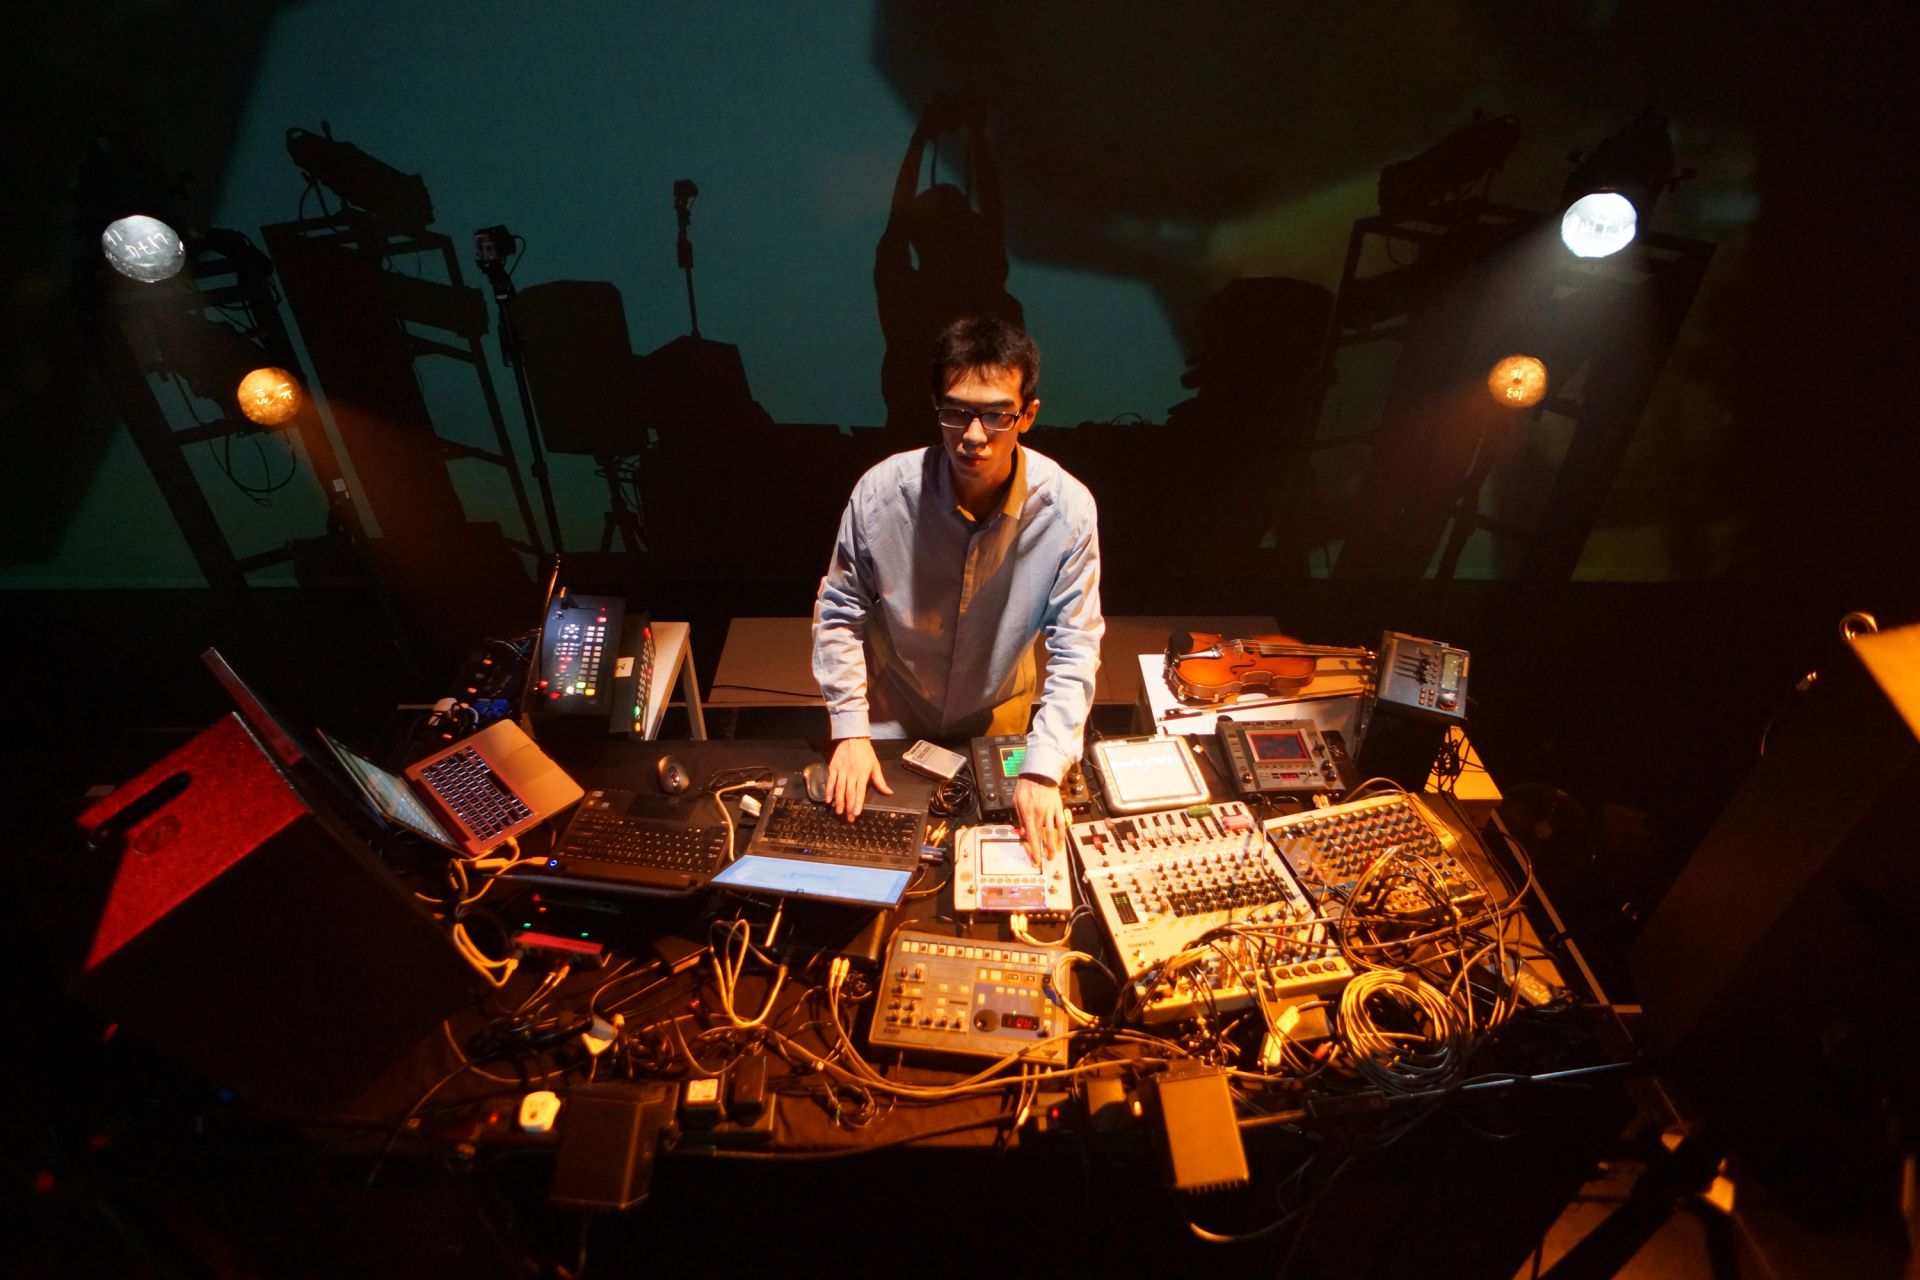 Choi Sai-ho surrounded by the banks of equipment he uses to create his music and visuals. 